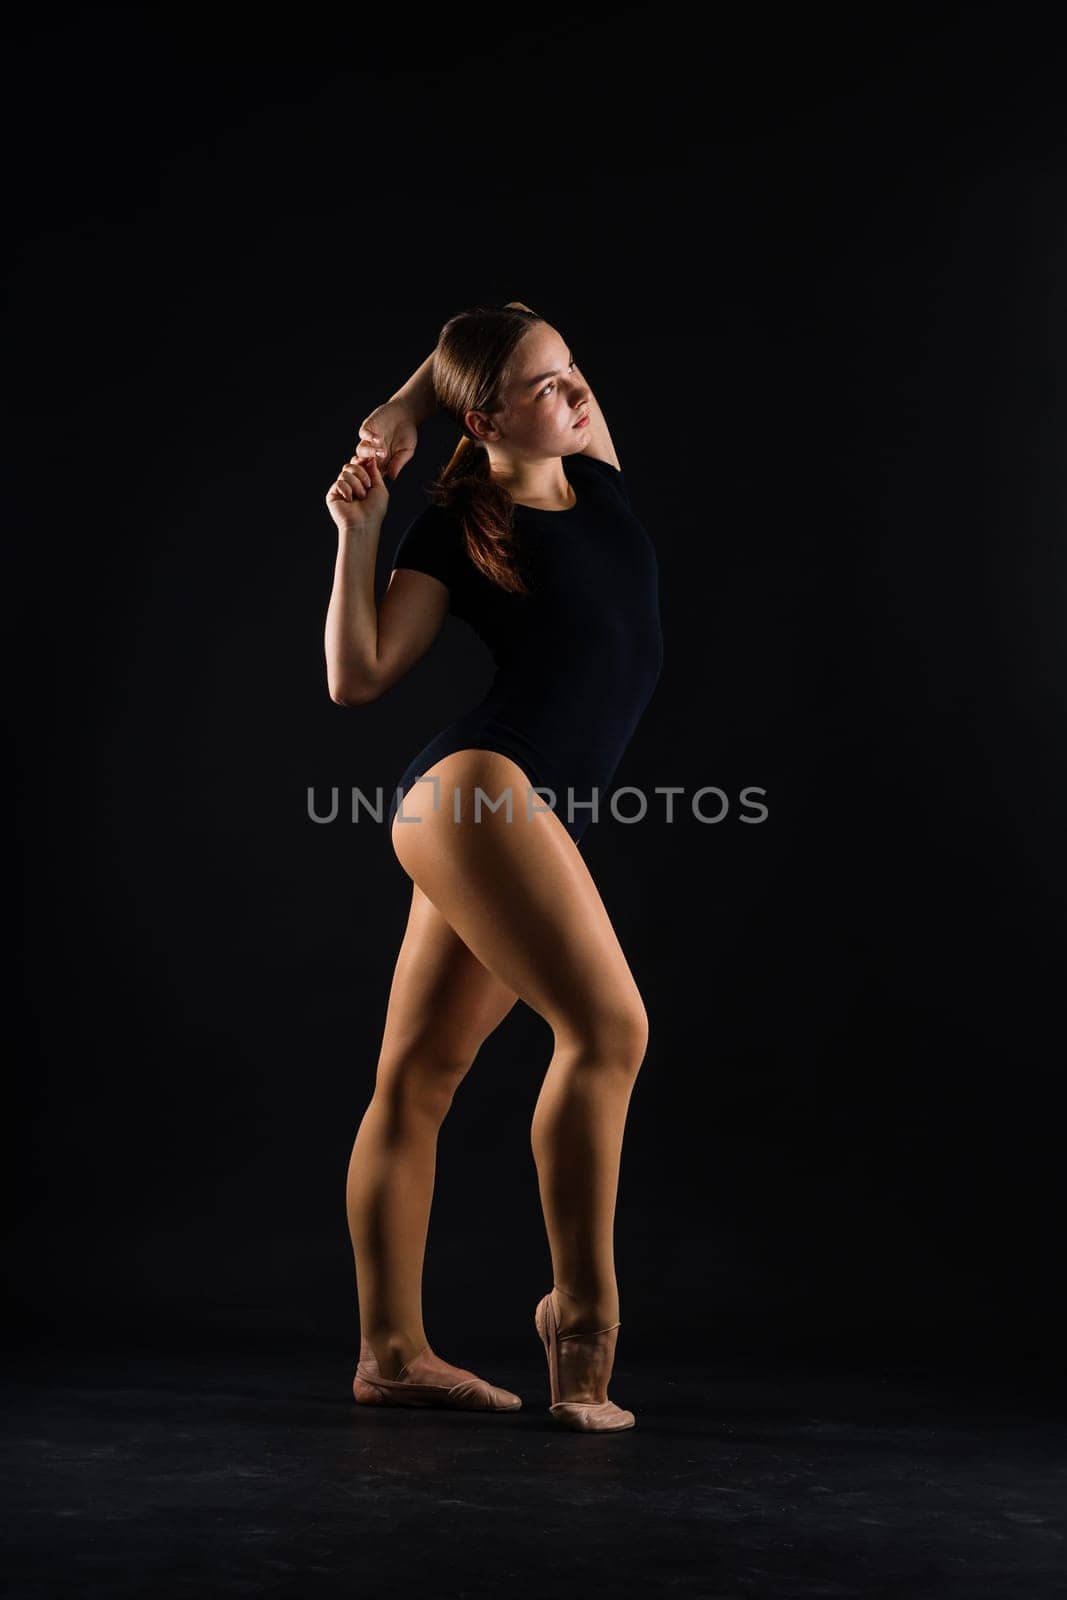 A girl gymnast in a swimsuit does tricks on white and dark background. Front view